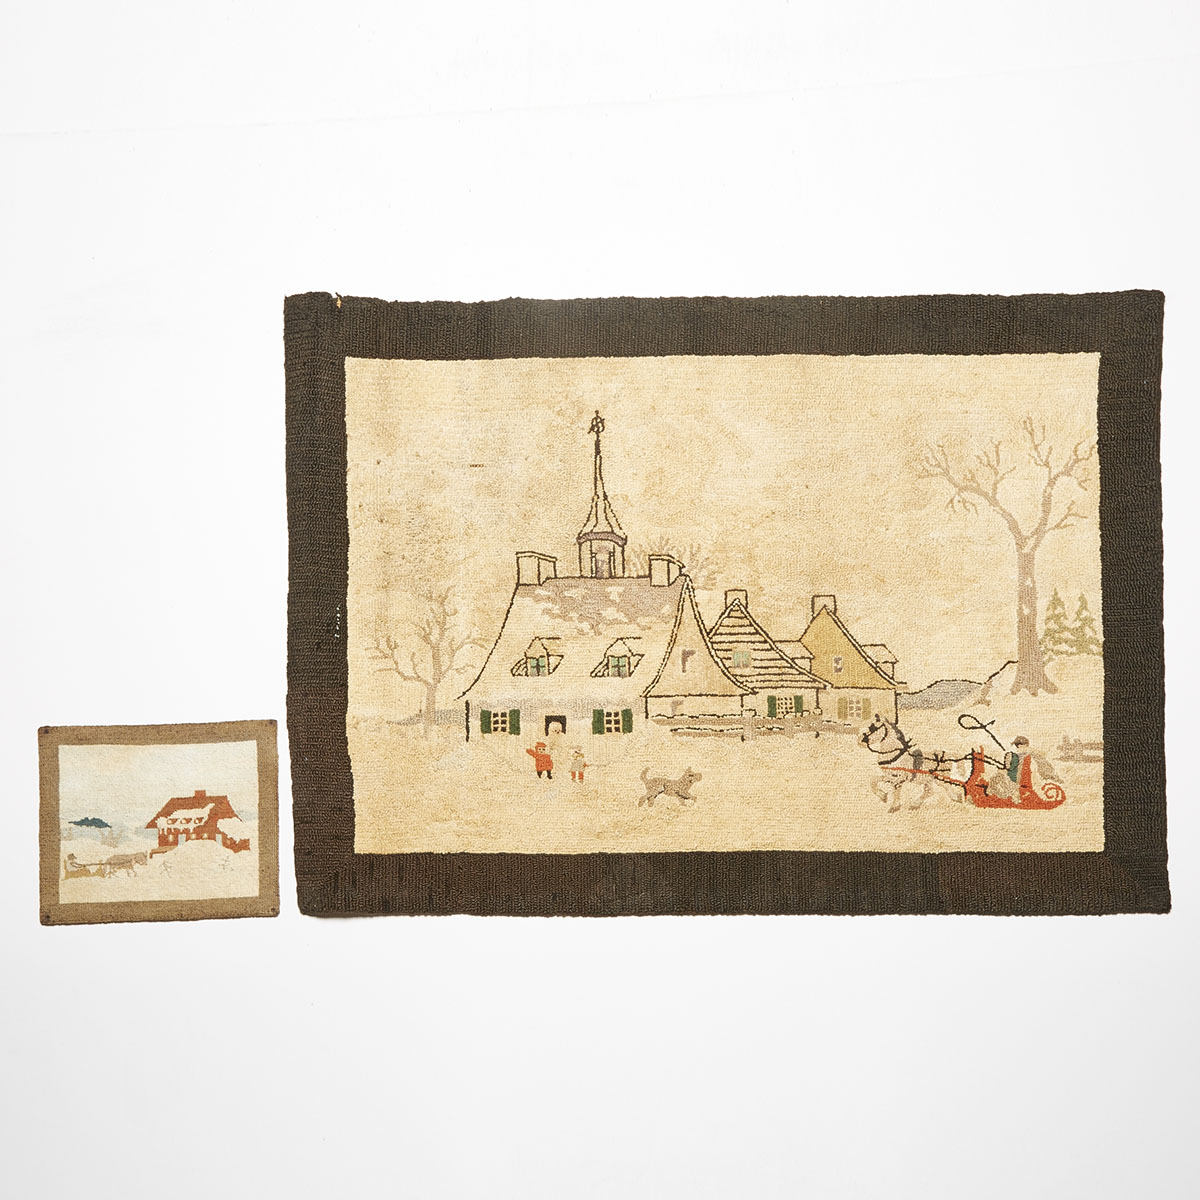 Quebec Scenic Hooked Rug and Mat (2 pieces), early 20th century